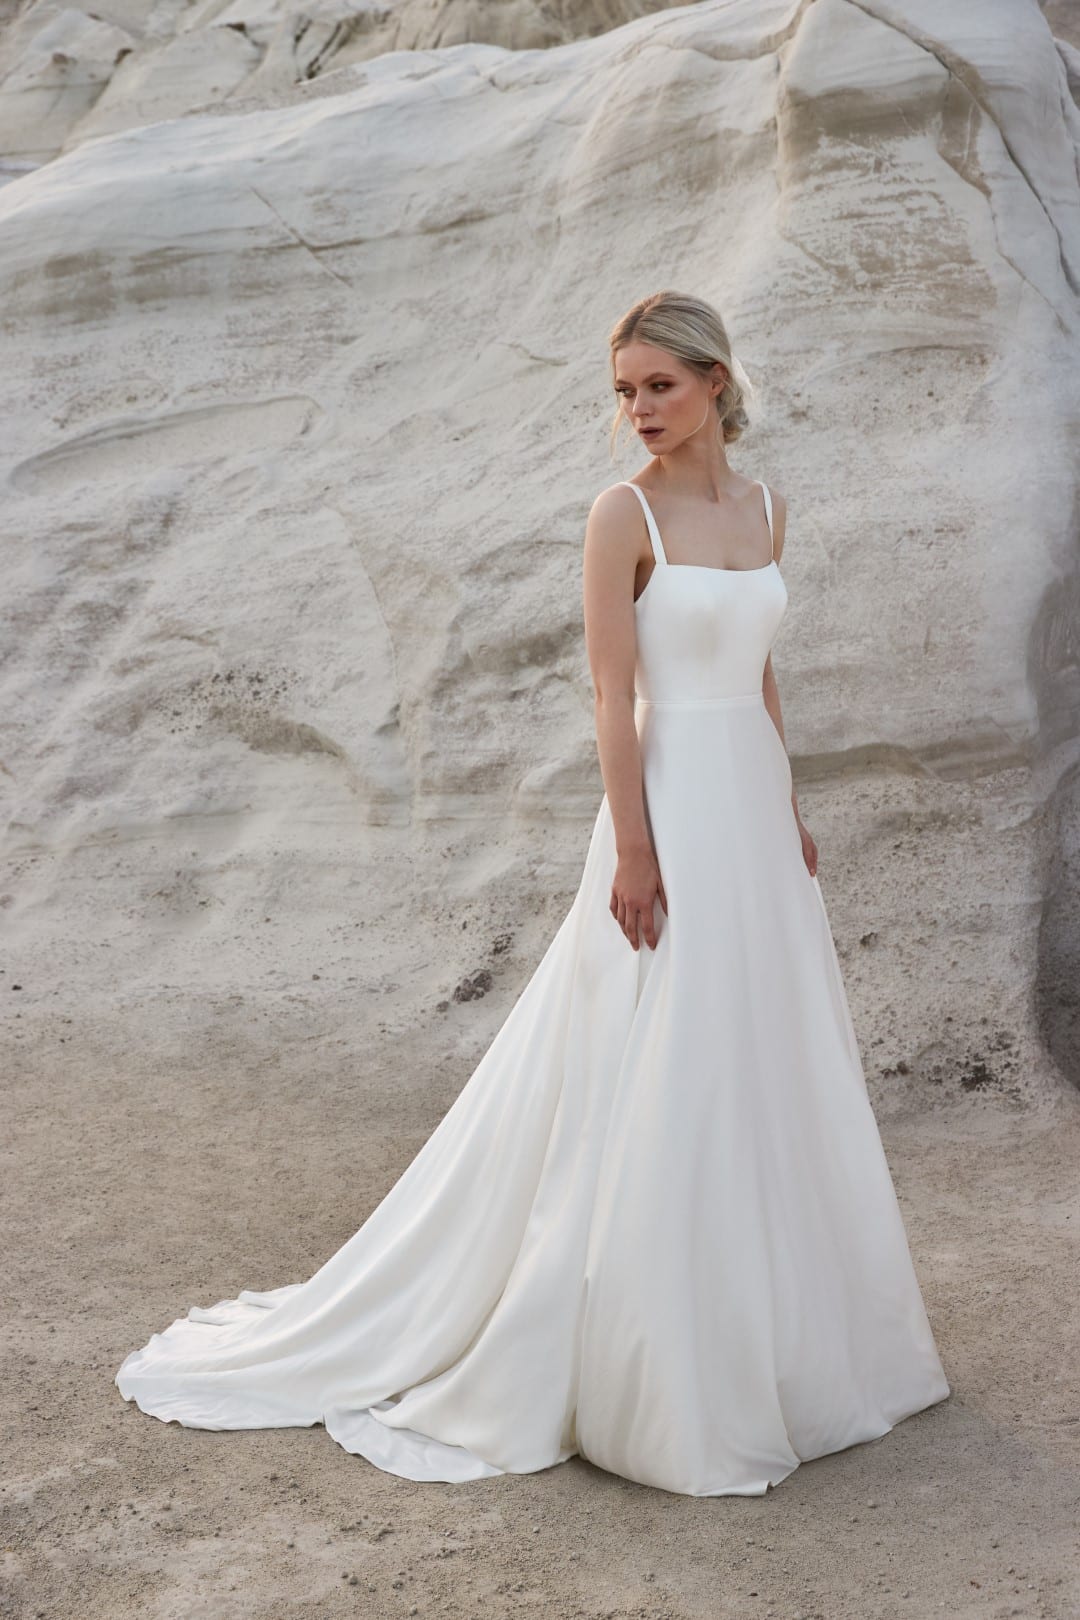 Sassi Holford Nina, crafted from the softest peau de soie, is simply stunning. A lightly corseted bodice is framed by elegant straps before flowing into a slim A-line skirt. A low square feature back finishes this timeless design. Shop for your wedding dress at Your Dream Bridal Boston.